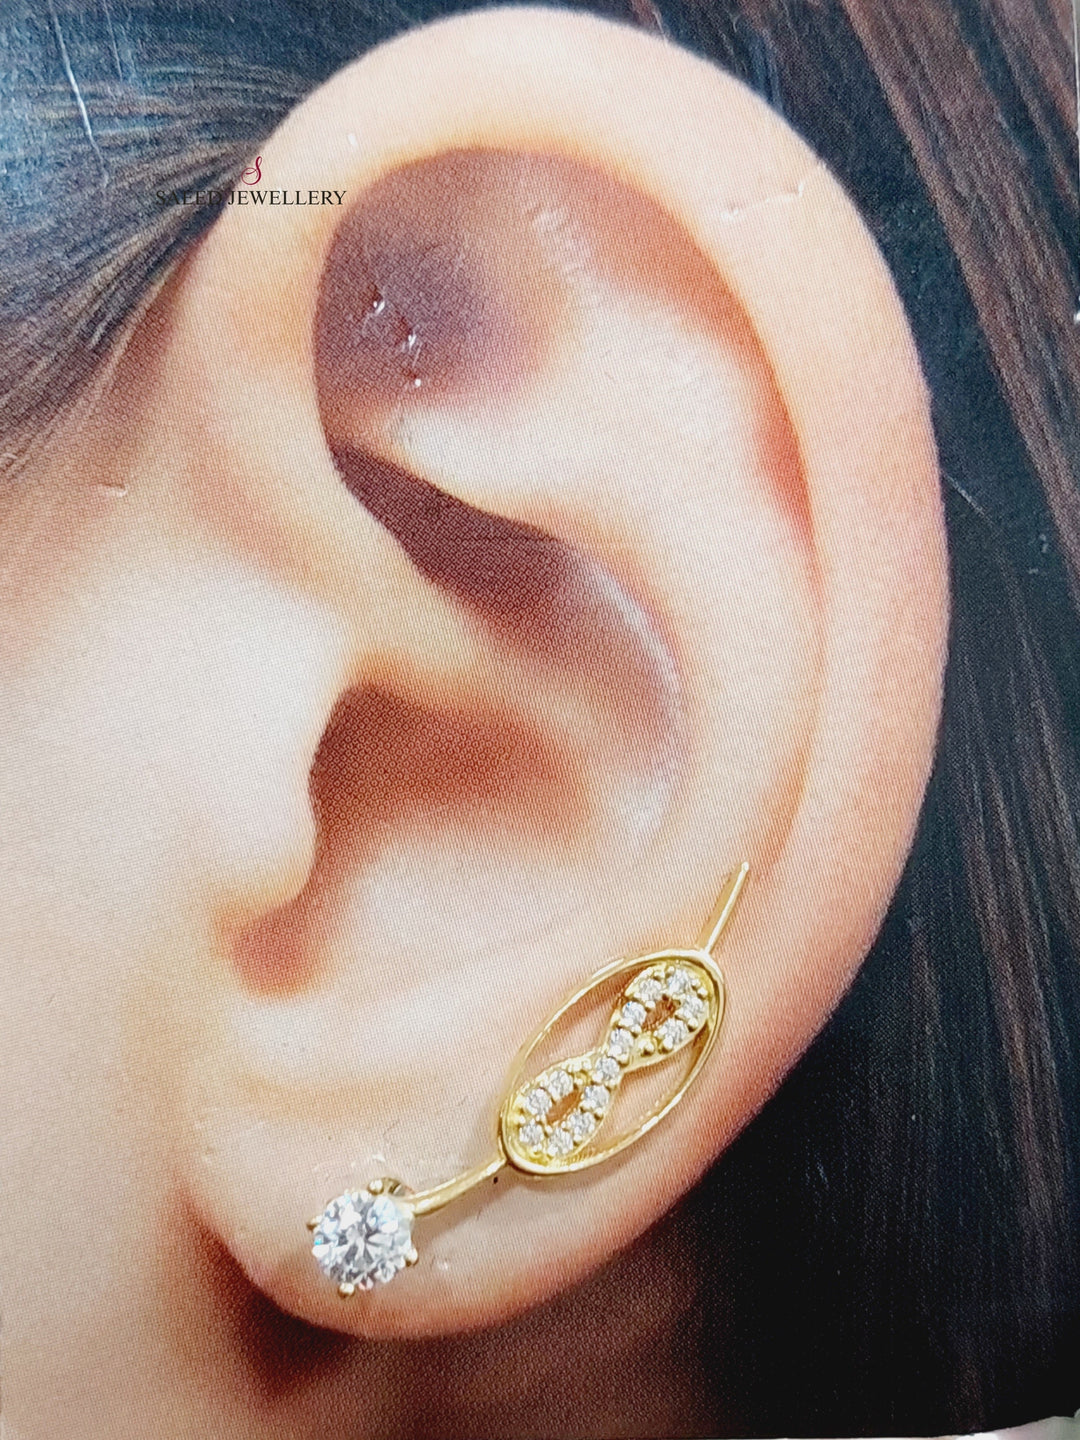 18K Gold Turkish Earrings by Saeed Jewelry - Image 1